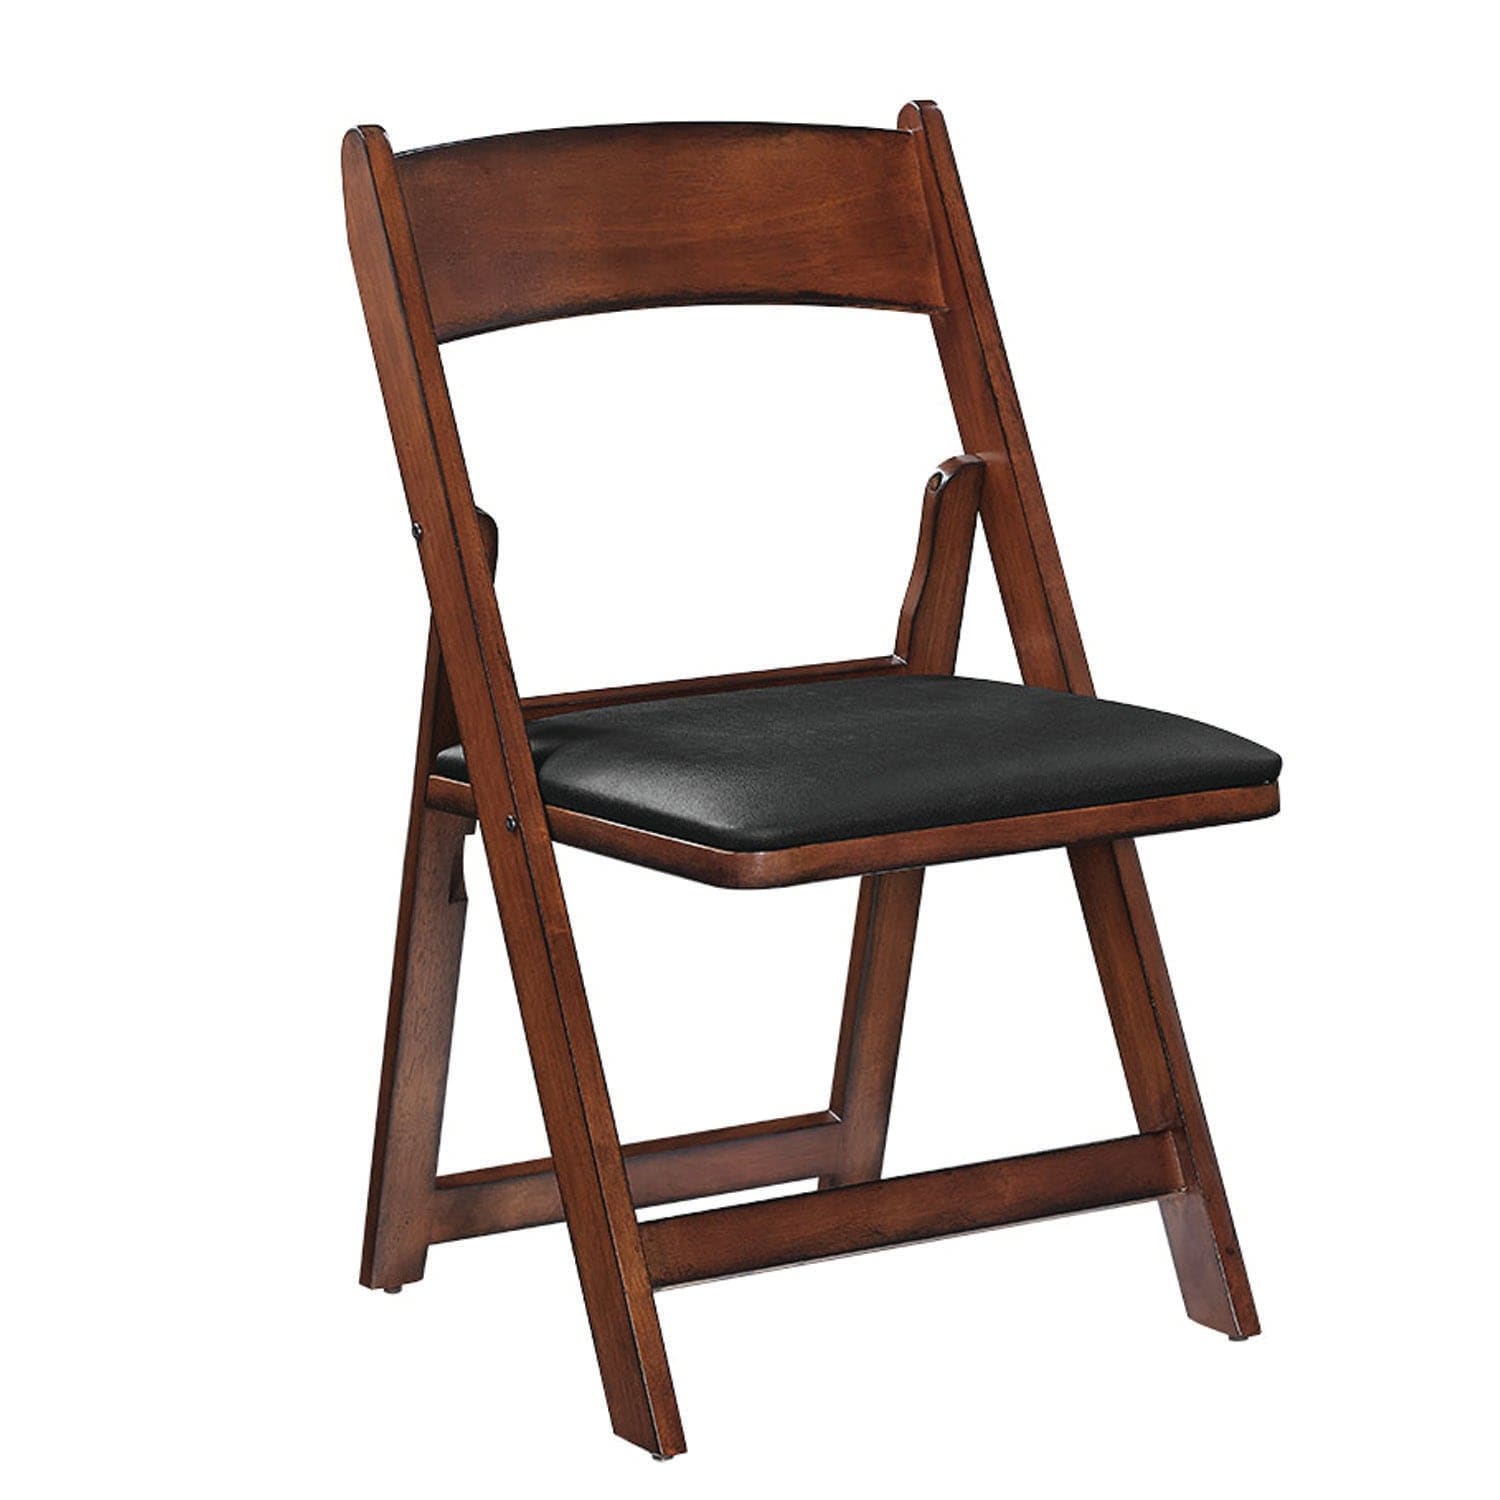 RAM Game Room Folding Game Chair - Atomic Game Store